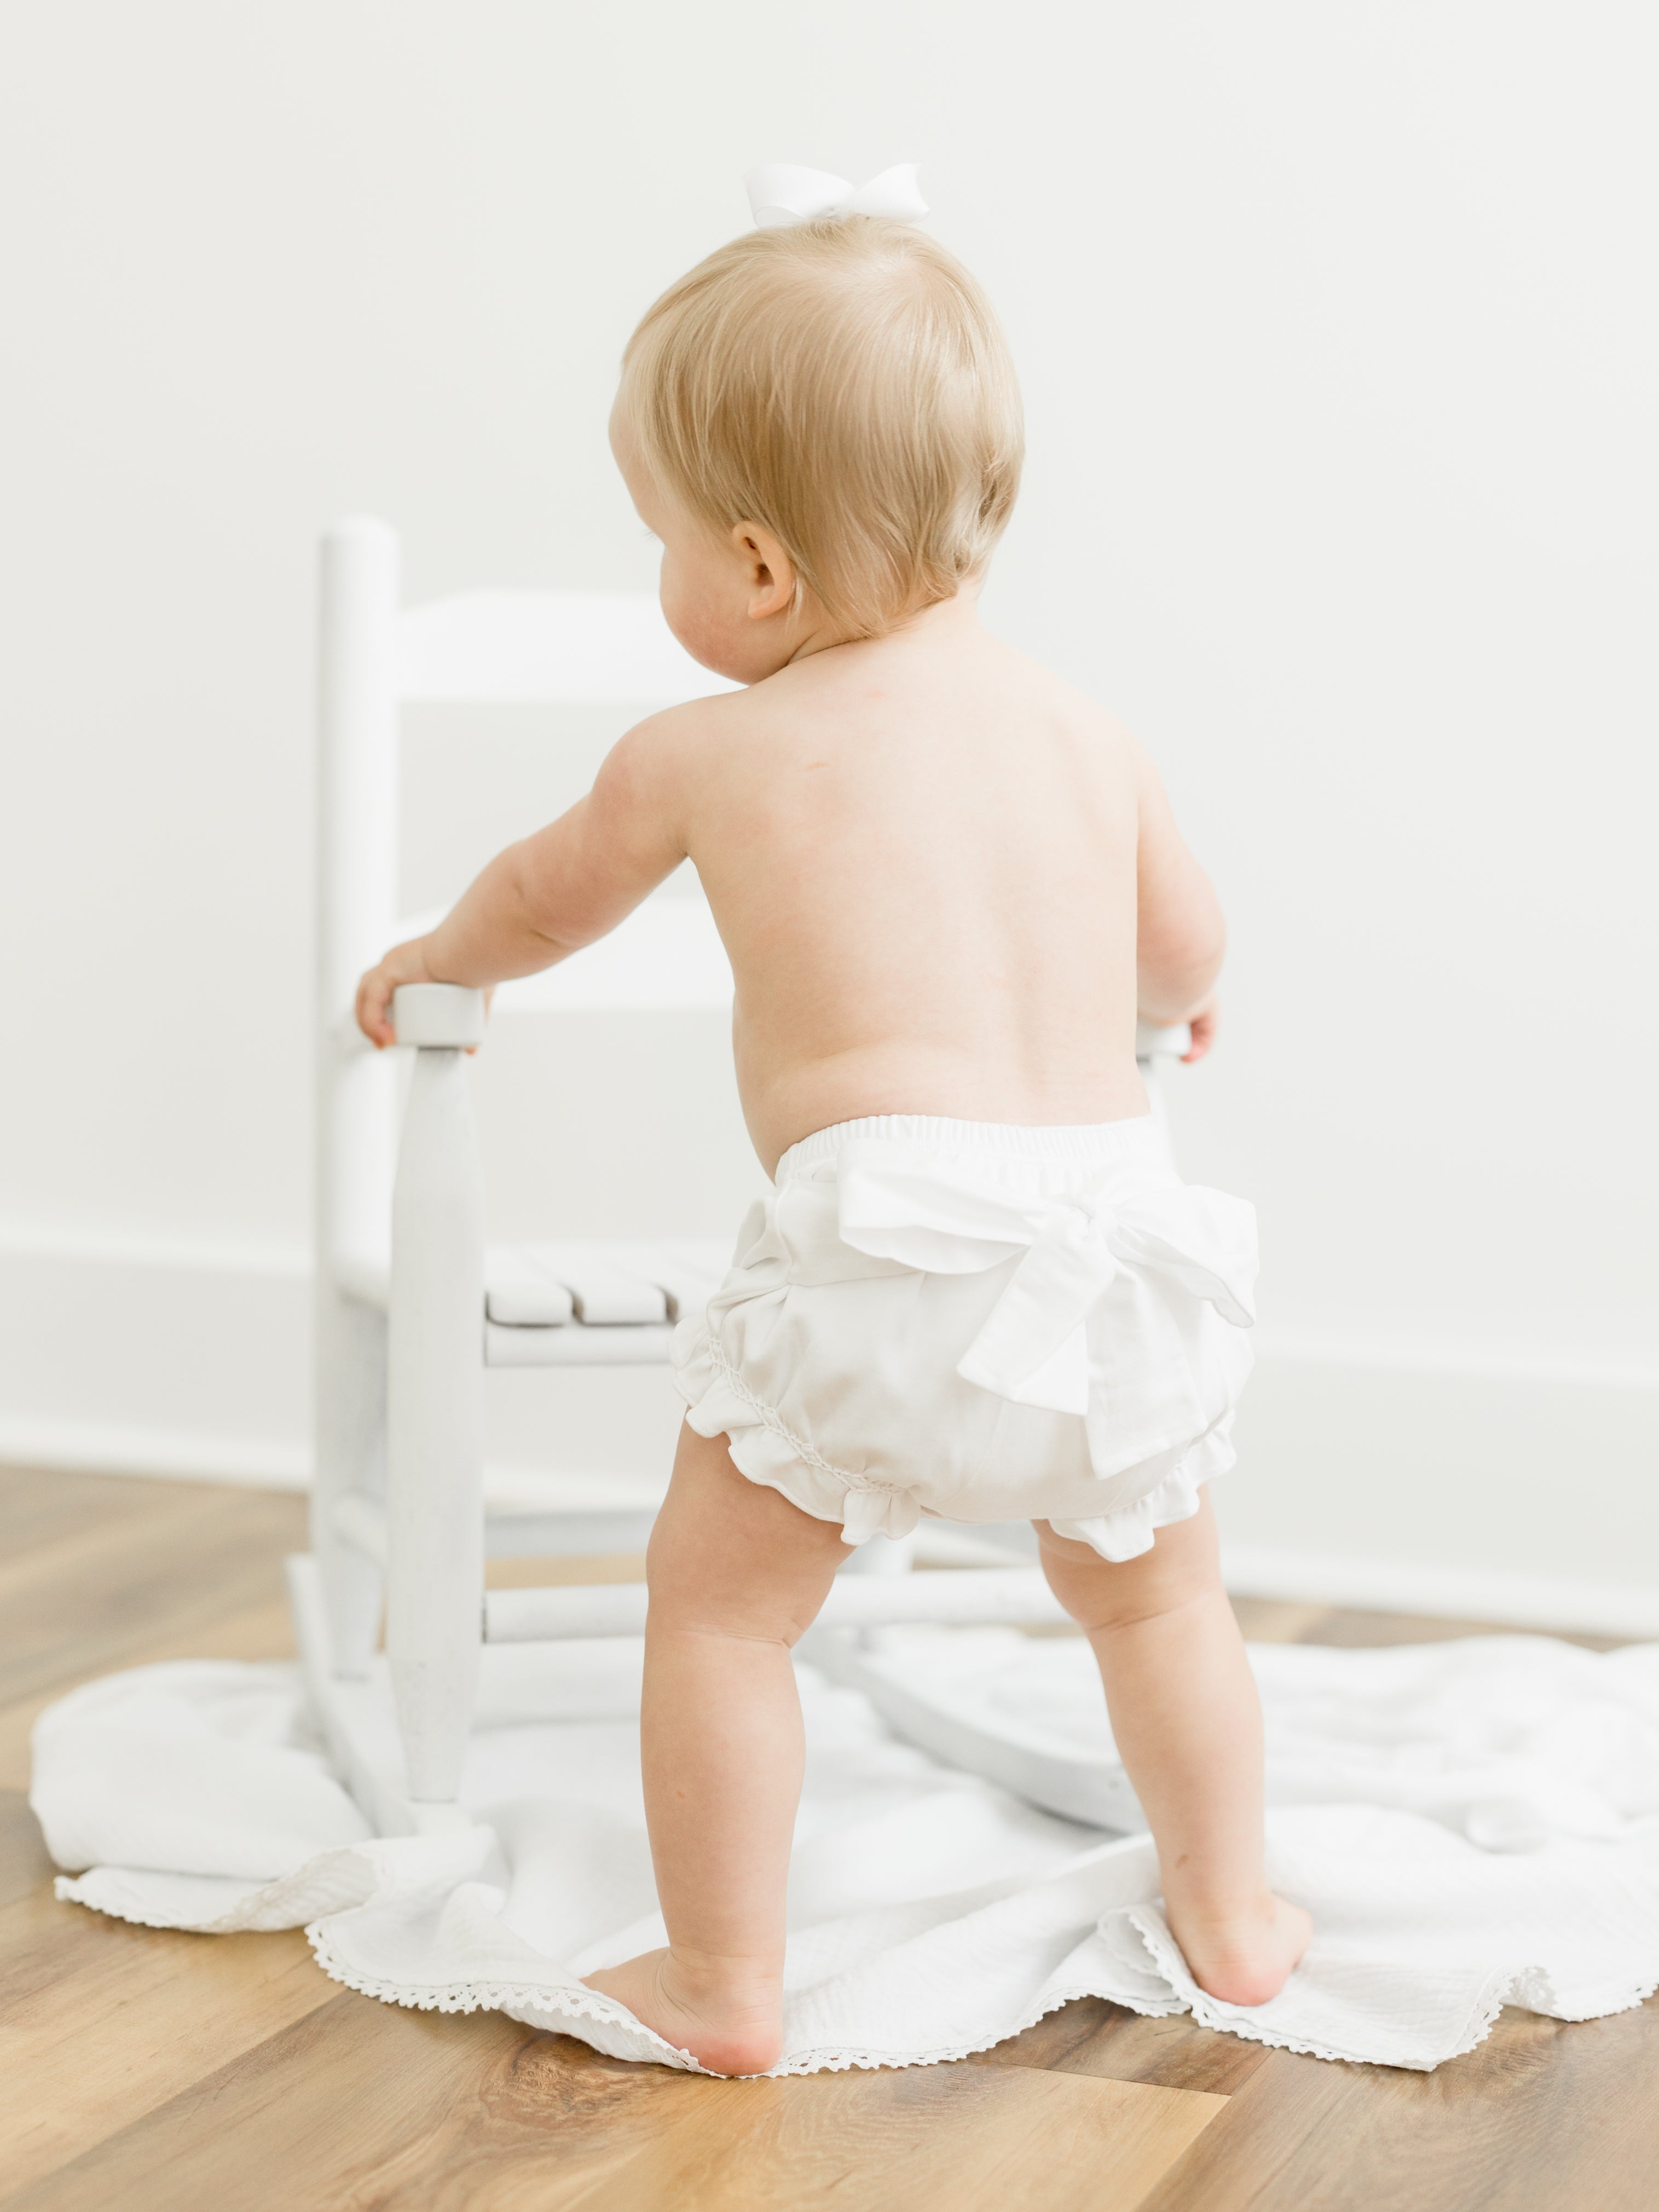 White Baby Bow Bloomers